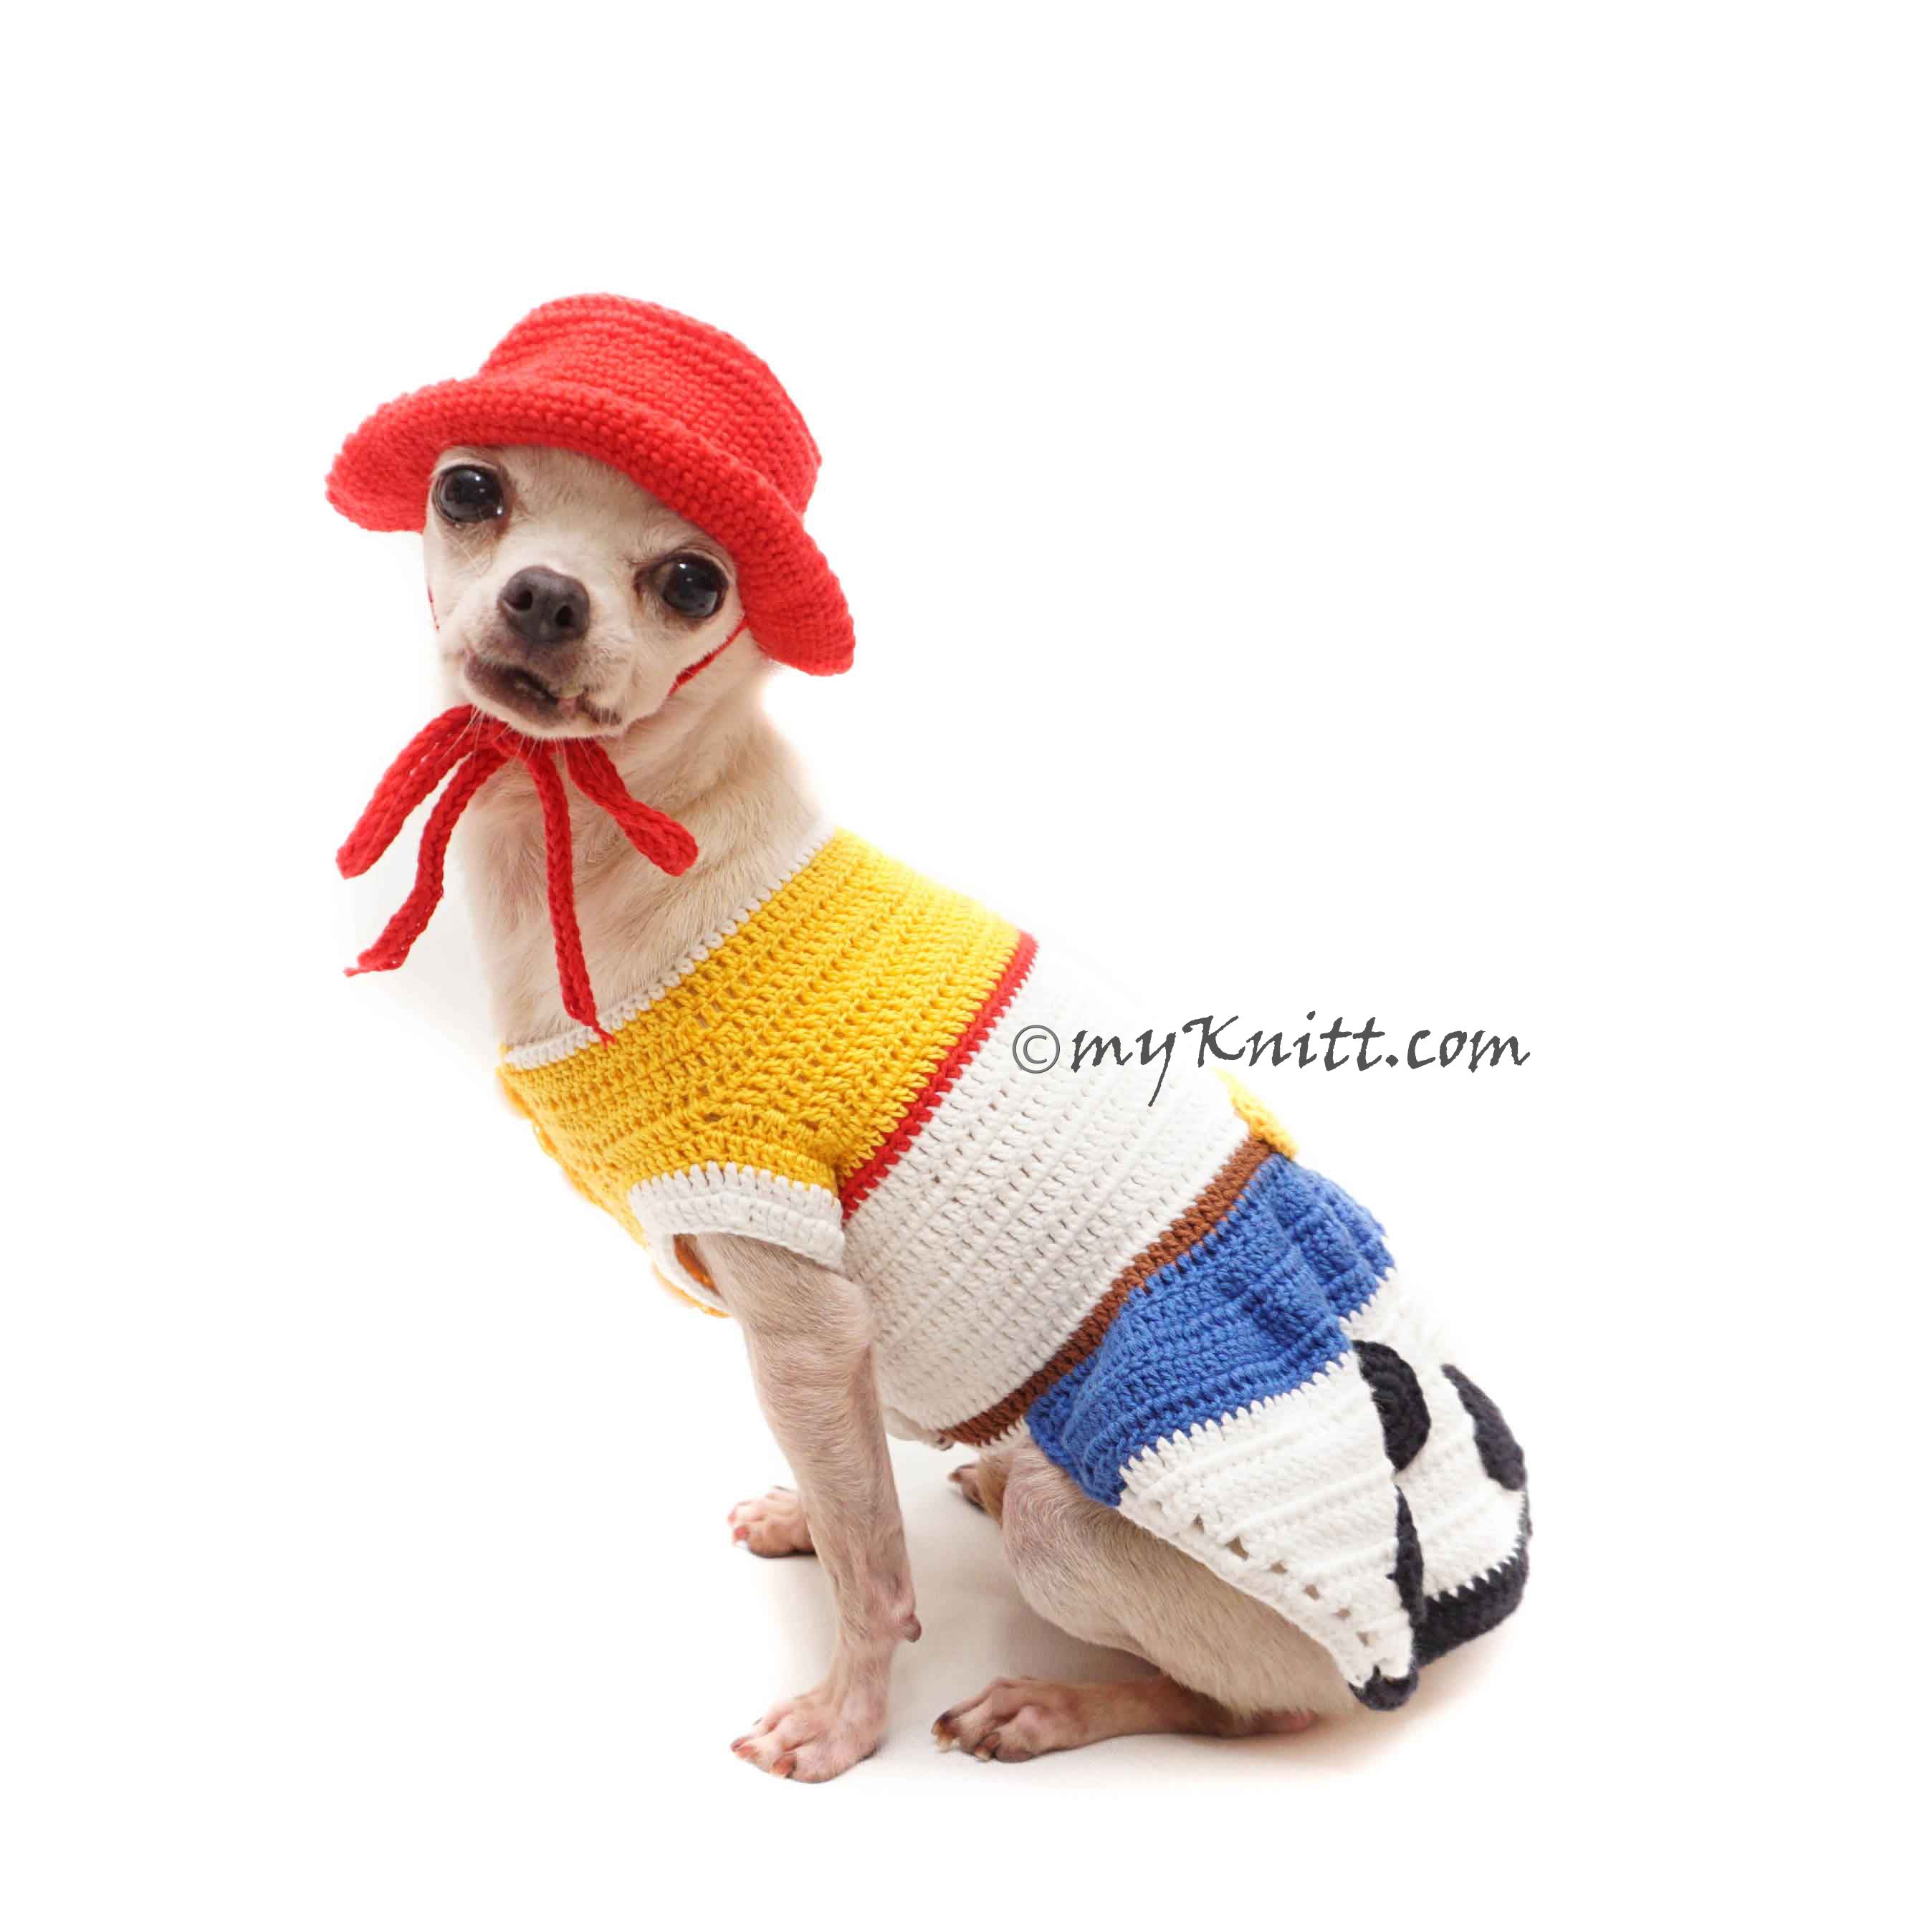 toy story cowboys costume for dogs cats, myknitt designer dog clothes 